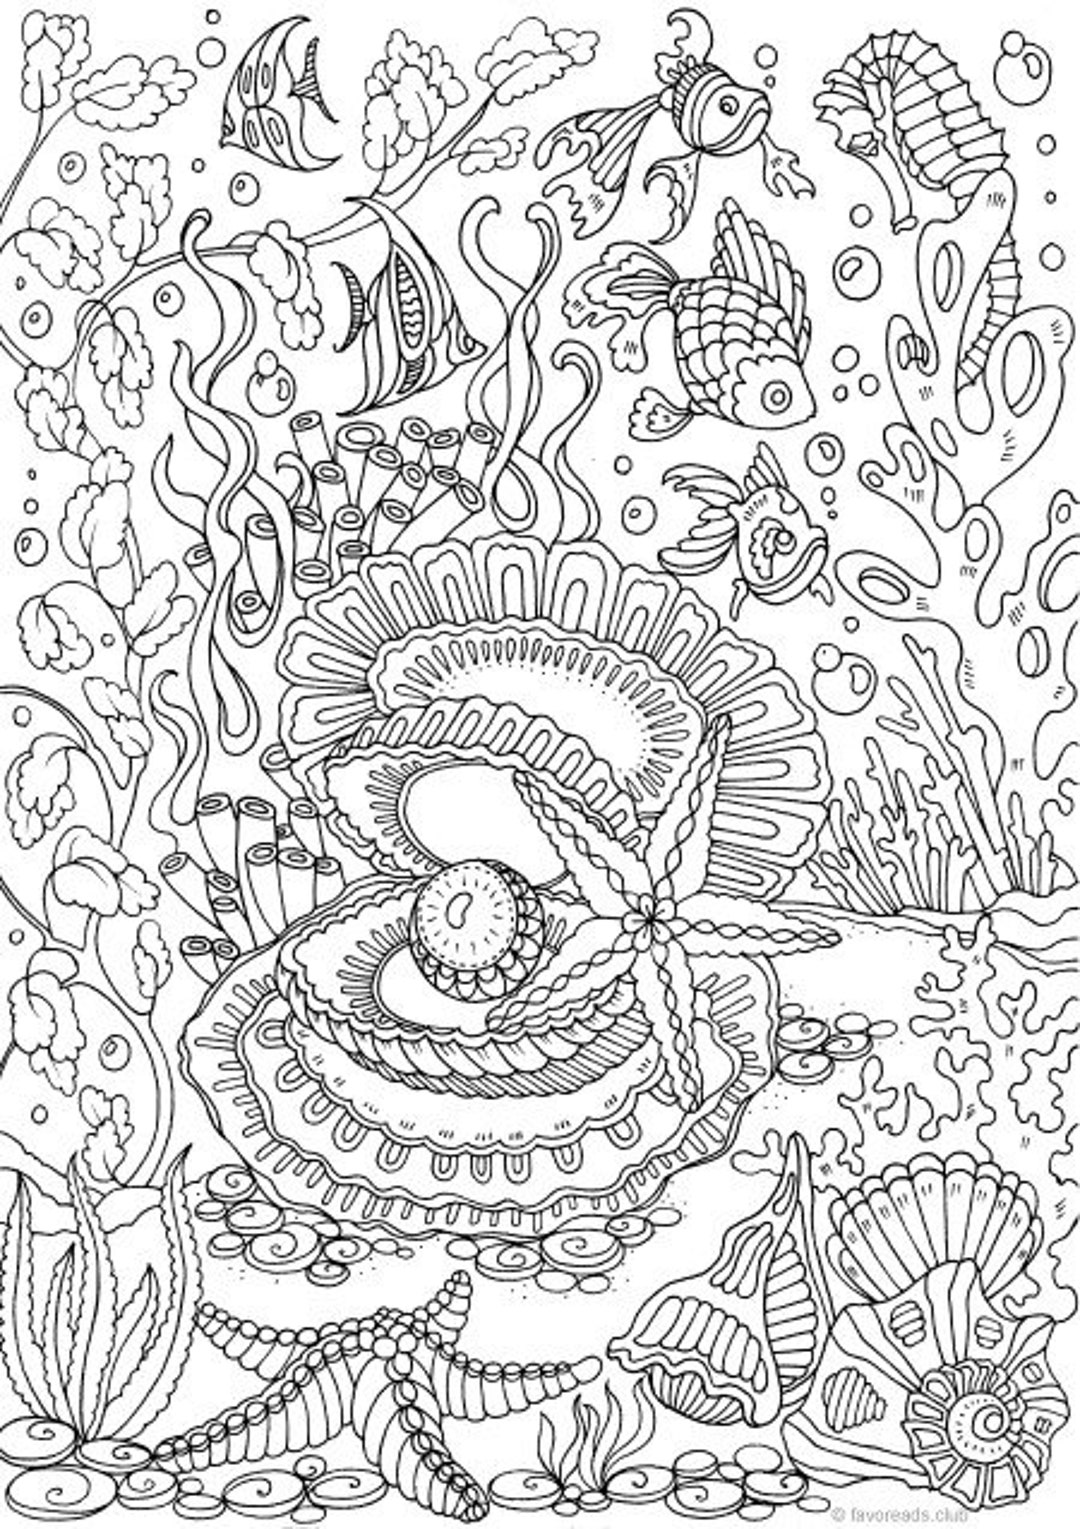 Detailed Coloring Books For Kids: Ocean Designs: Advanced Coloring Pages  for Tweens, Older Kids, Boys & Girls - Art Therapy Coloring